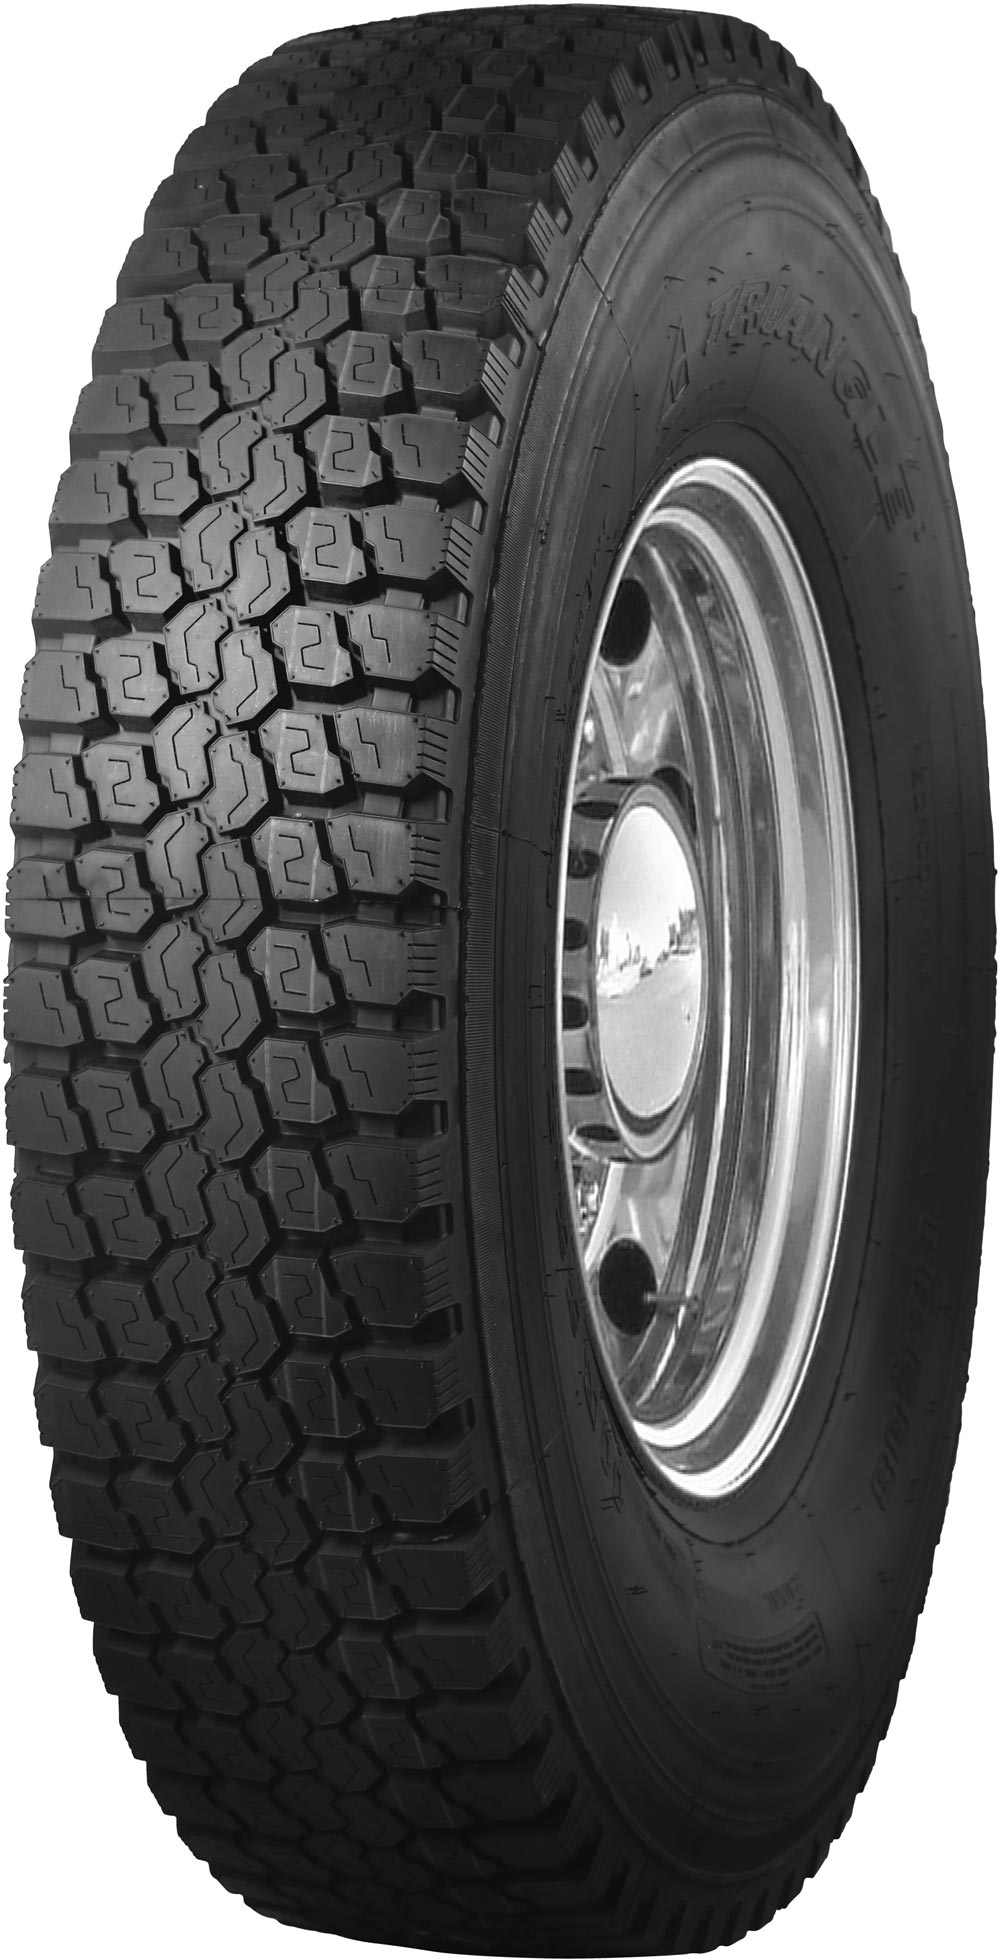 product_type-heavy_tires Triangle TR688 16PR 295/80 R22.5 152M